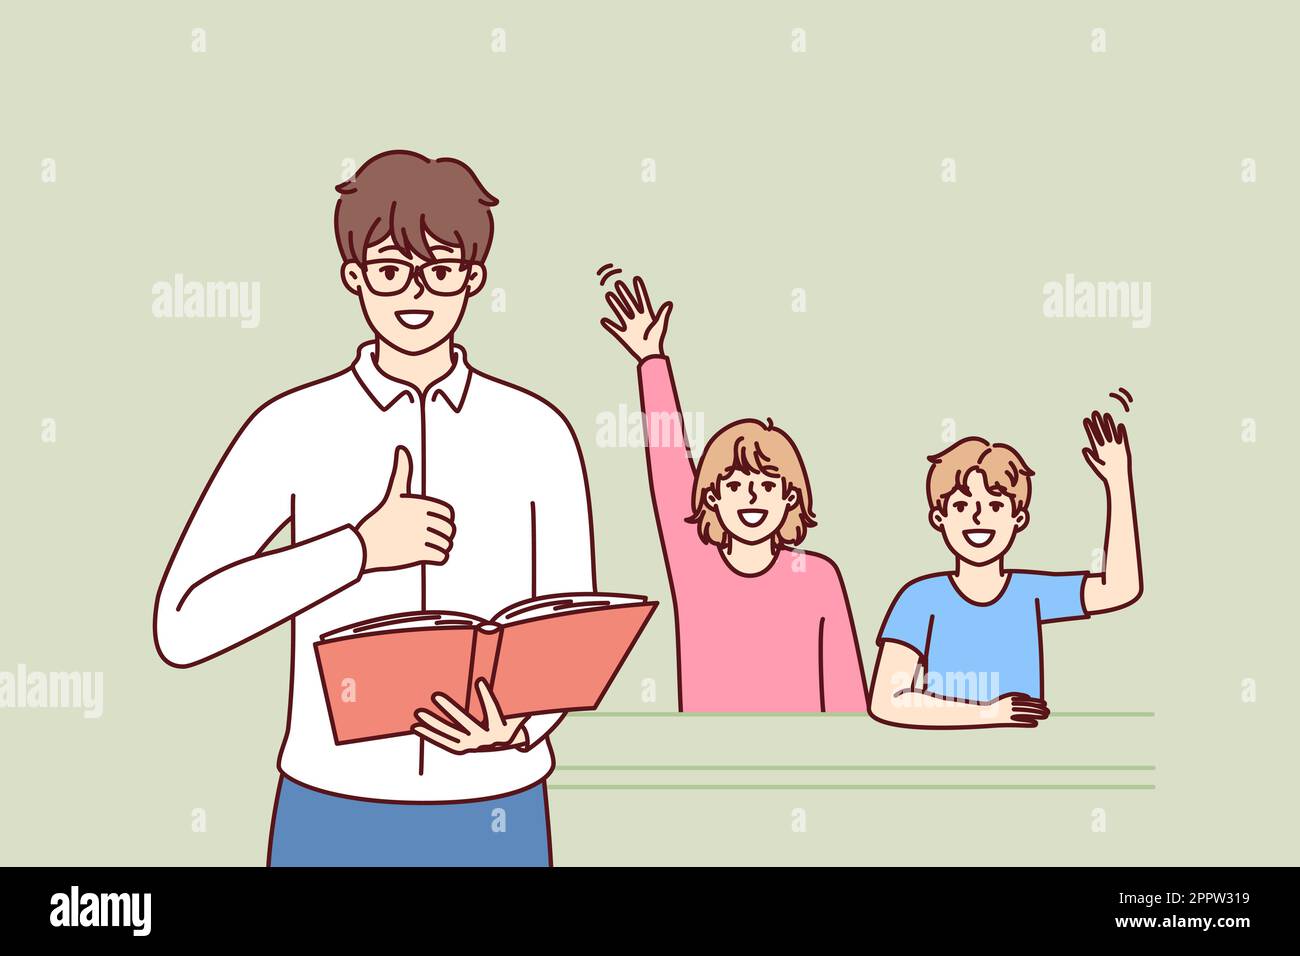 Man teacher with textbook stands near students sitting at school desk and raising hand Stock Vector